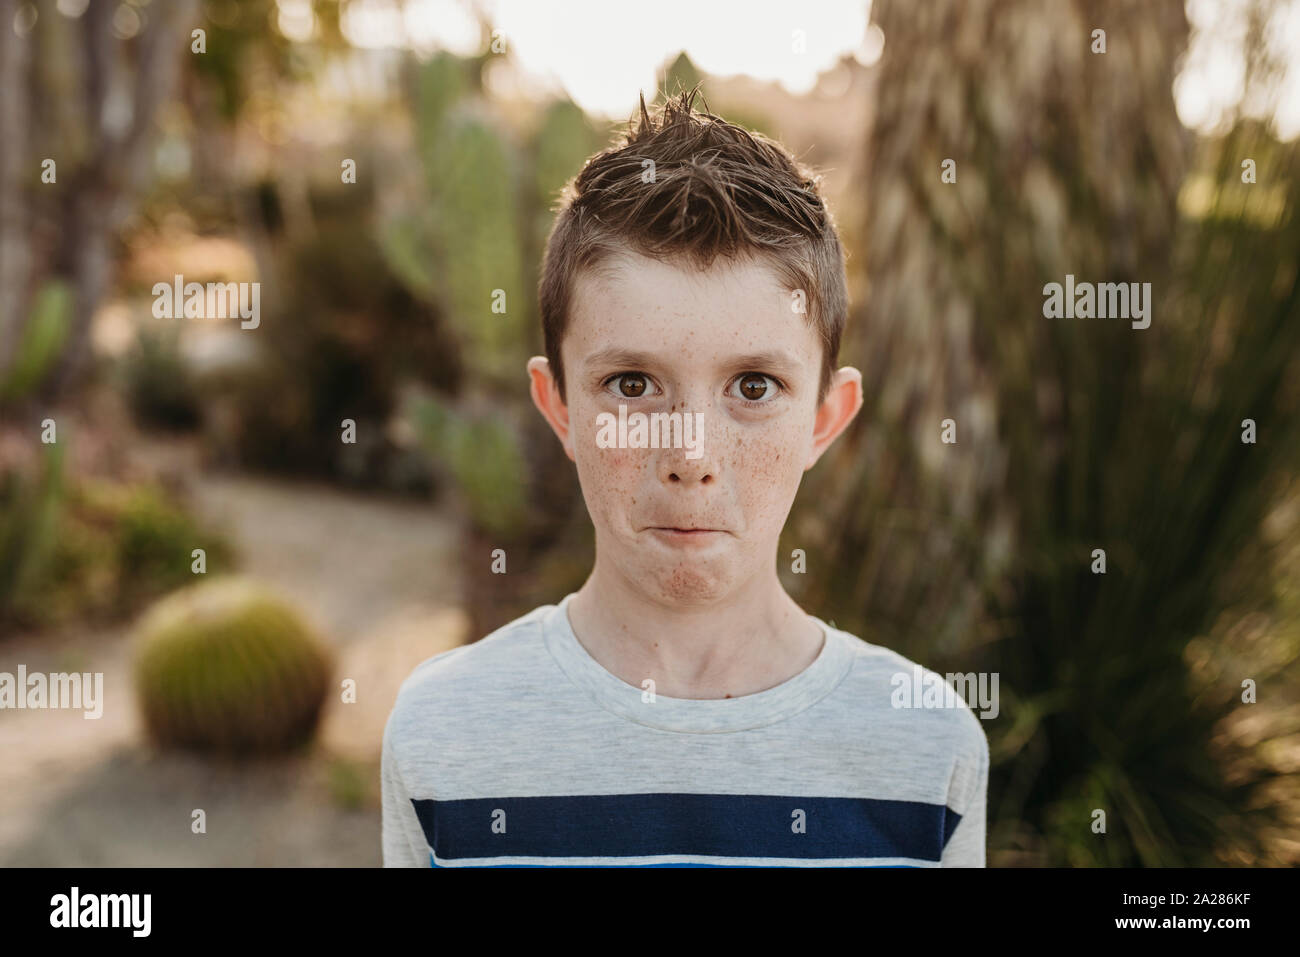 Close up portrait of cute young boy with freckles making funny face Stock Photo